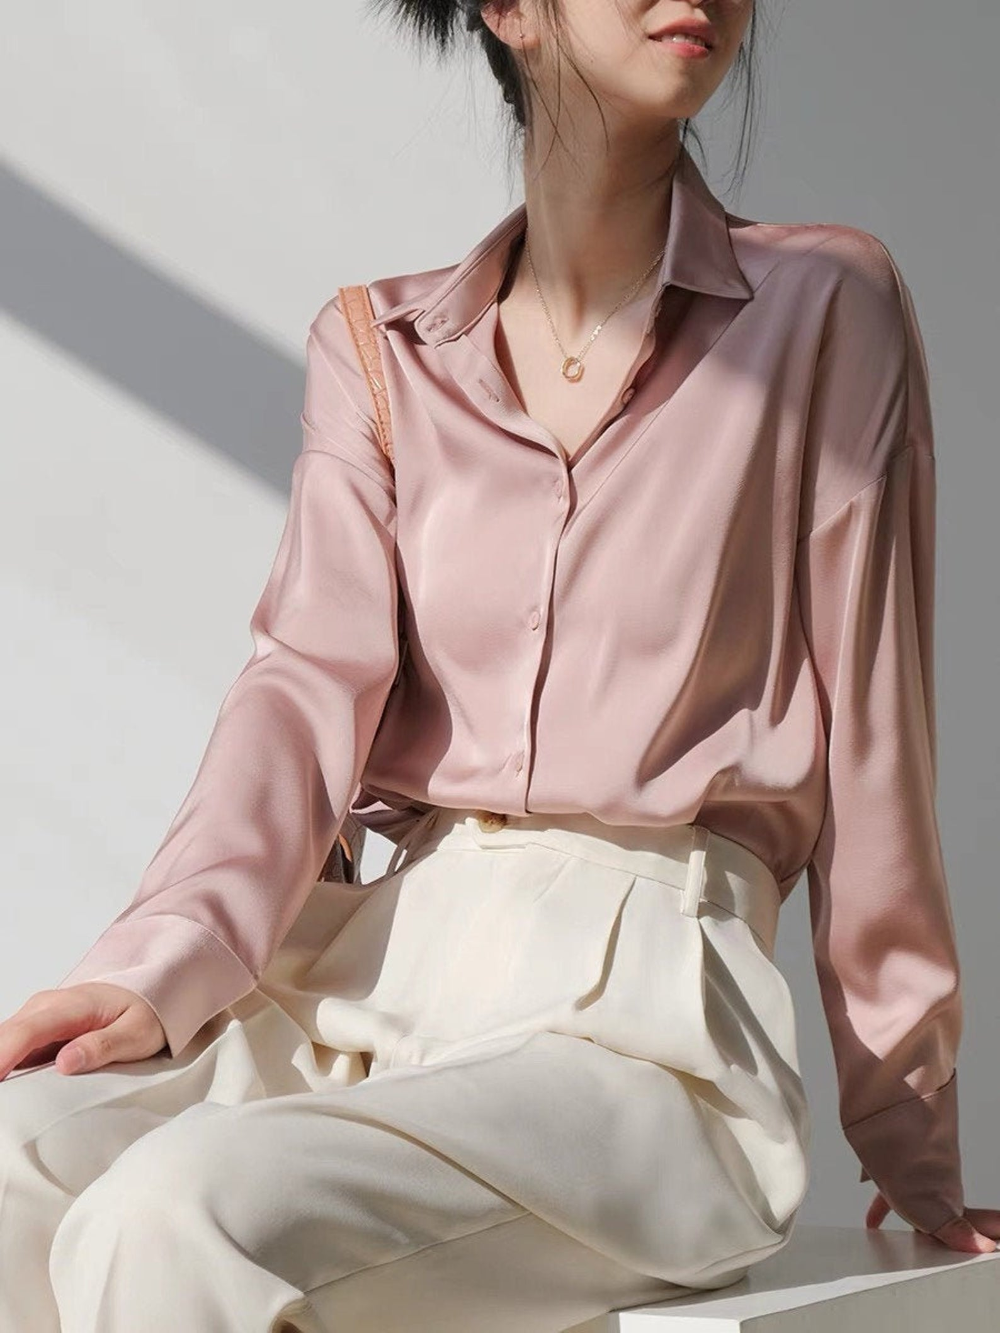 Silk Shirts: Luxurious Options for Every Occasion